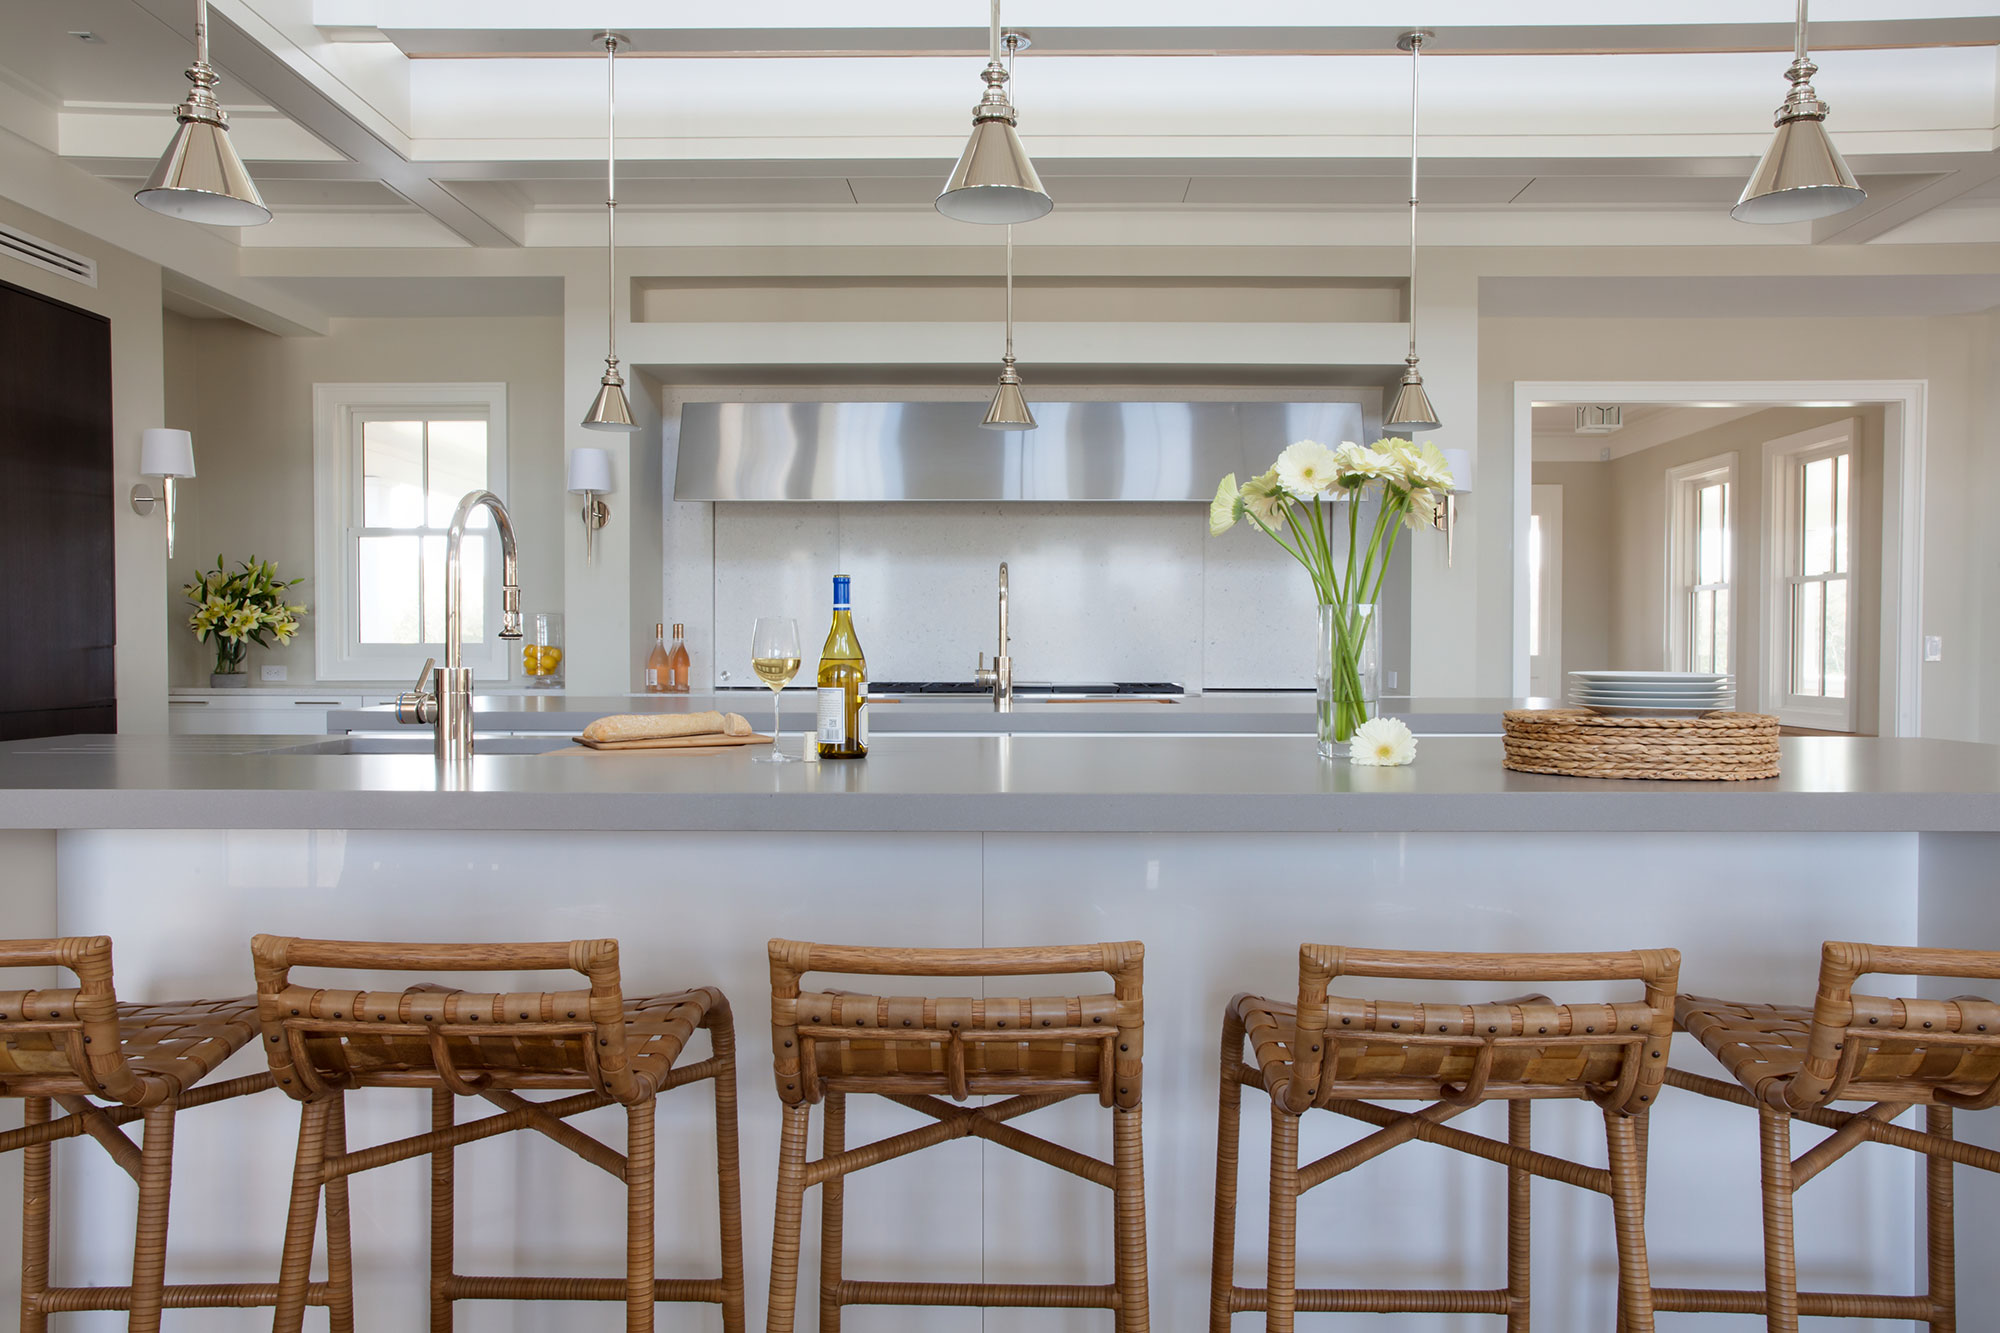 Kitchens On Nantucket And Boston Designed By Carolyn Thayer Interiors,Latest Pattu Sarees Designs 2019